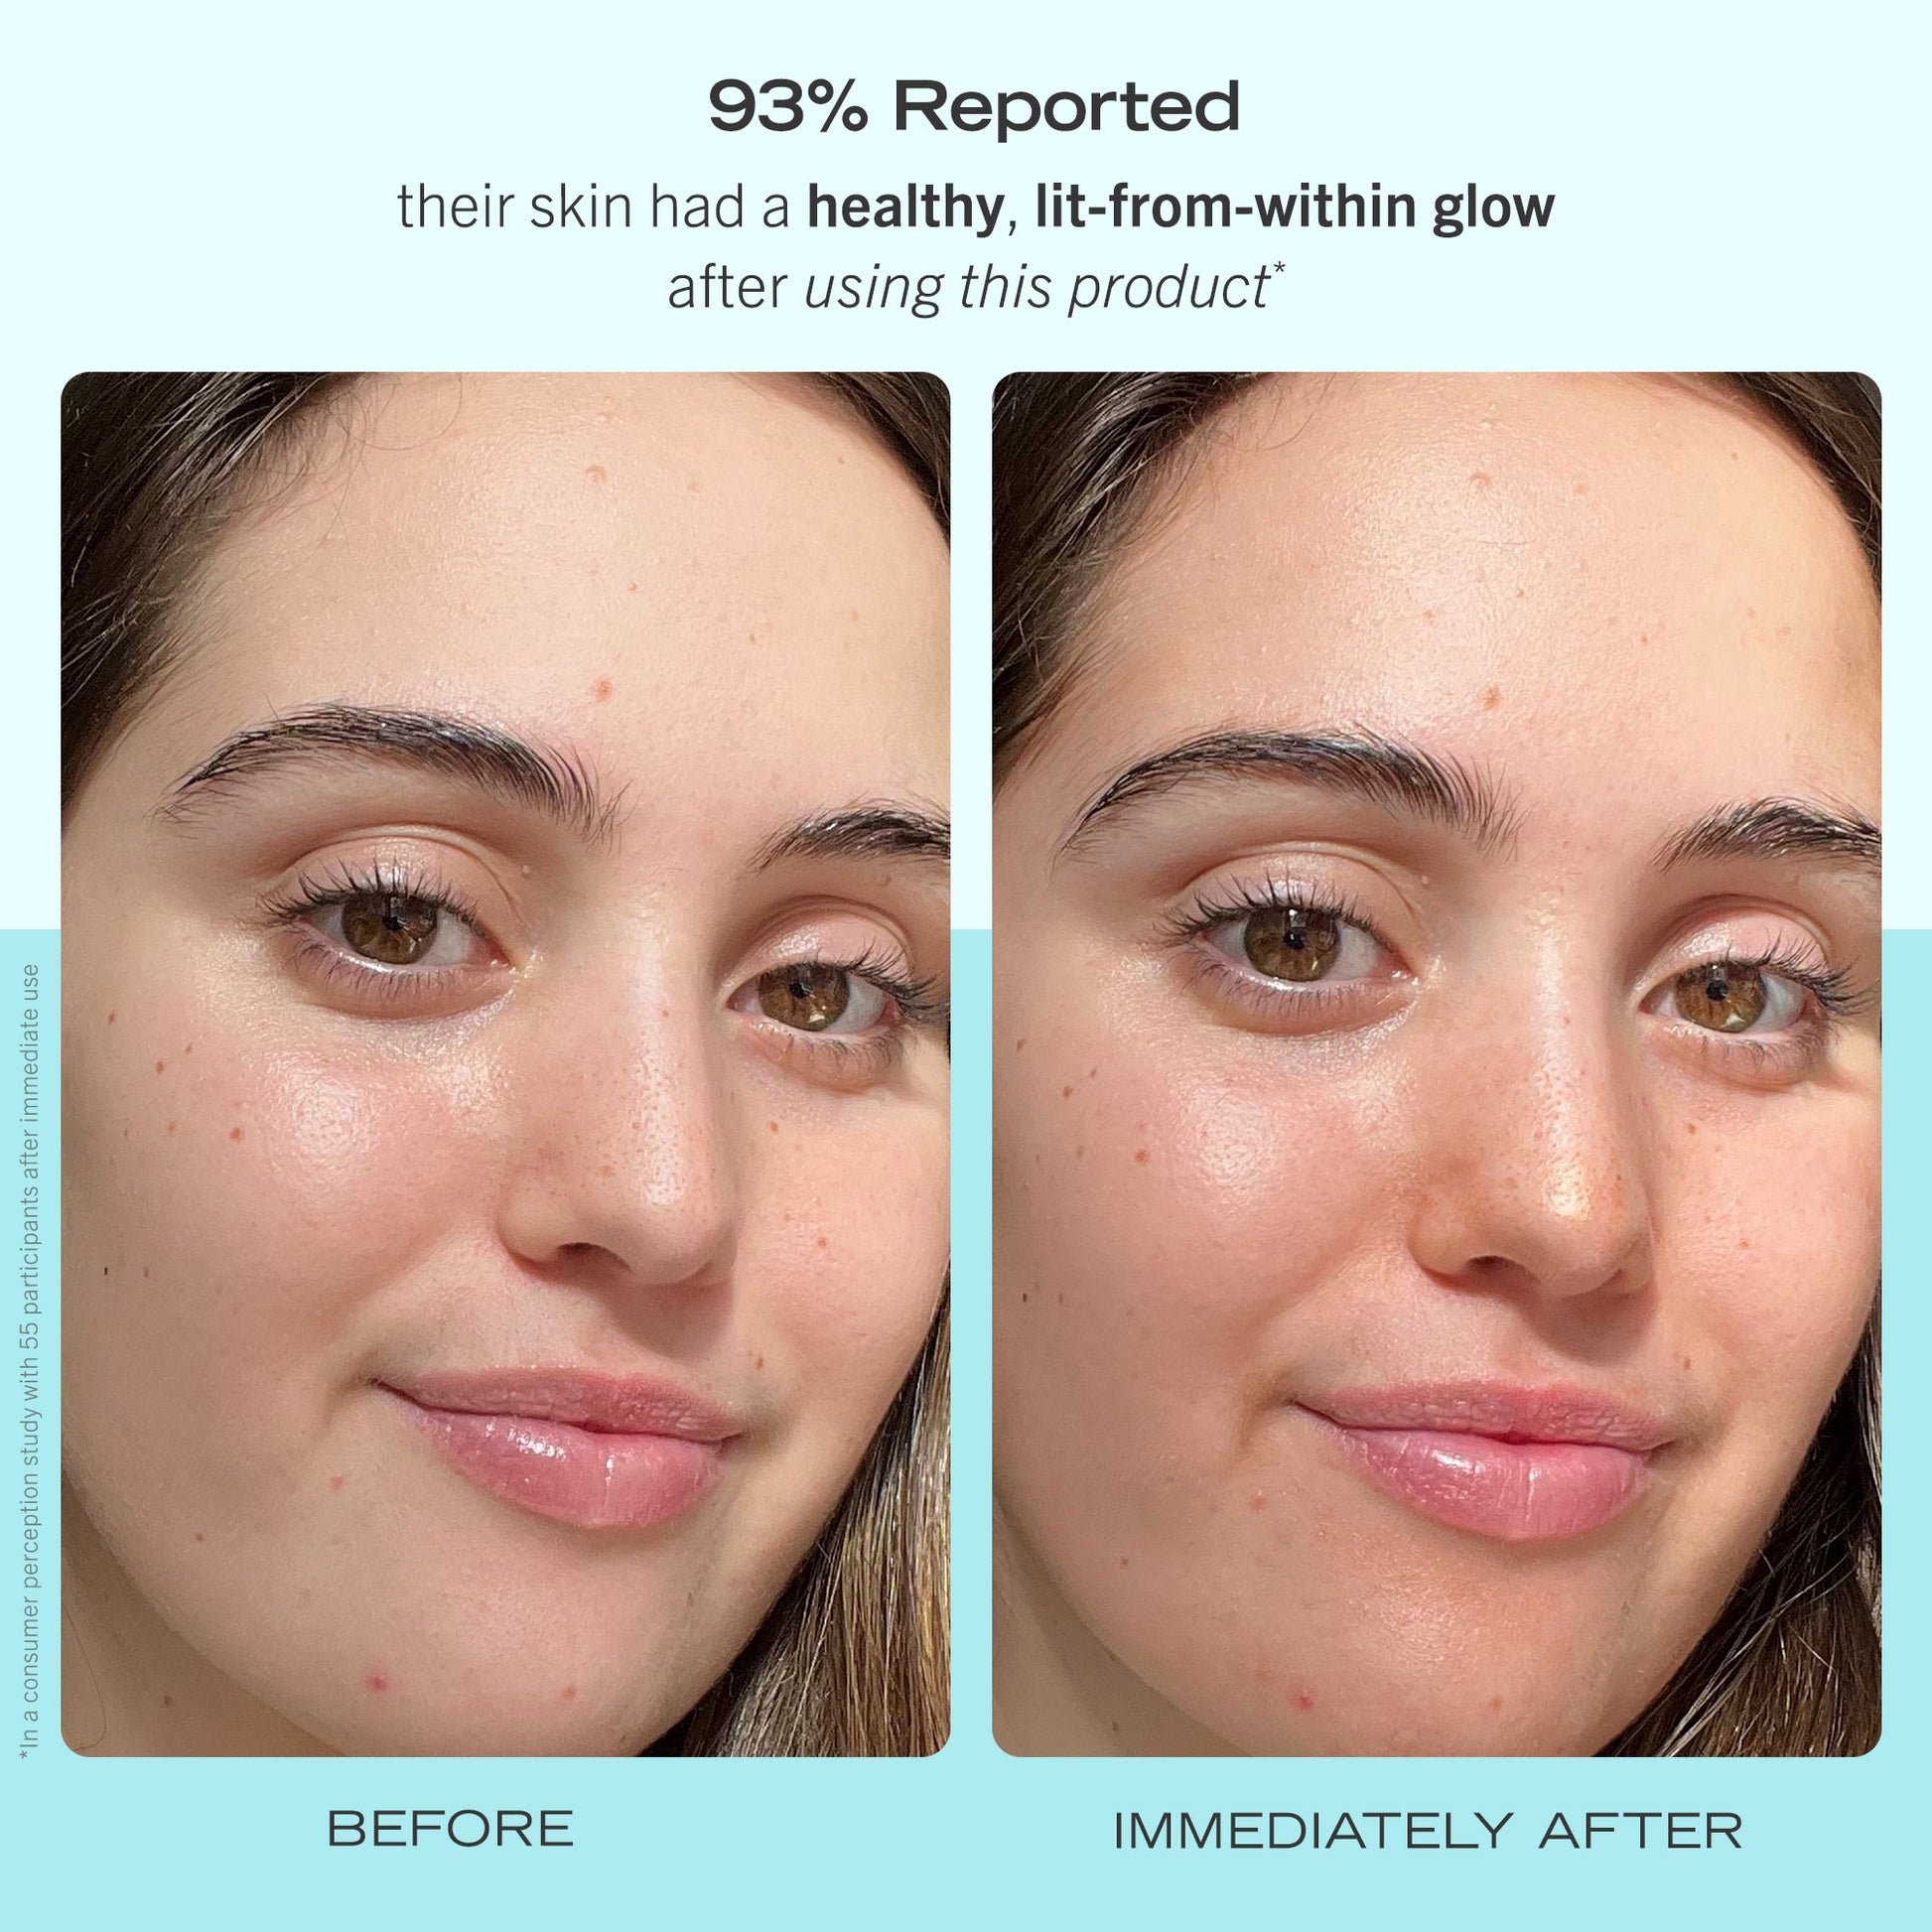 Model of Before and Immediately after using Bronze + Glow Drops.  93% Reported their skin had a healthy, lit-from-within glow after using this product.